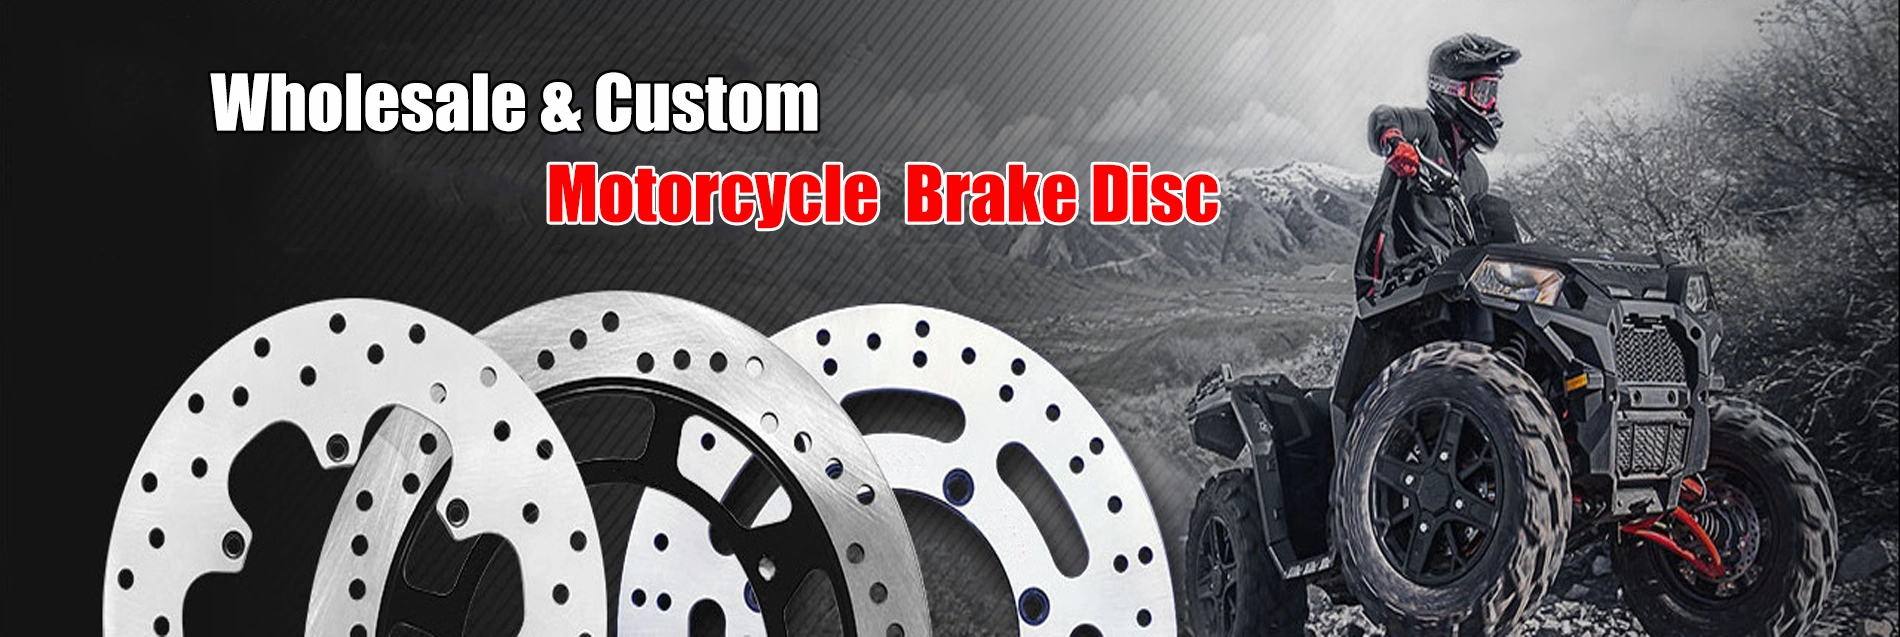 Custom floating front 310mm motorcycle brake disc for Triumph Road Bike